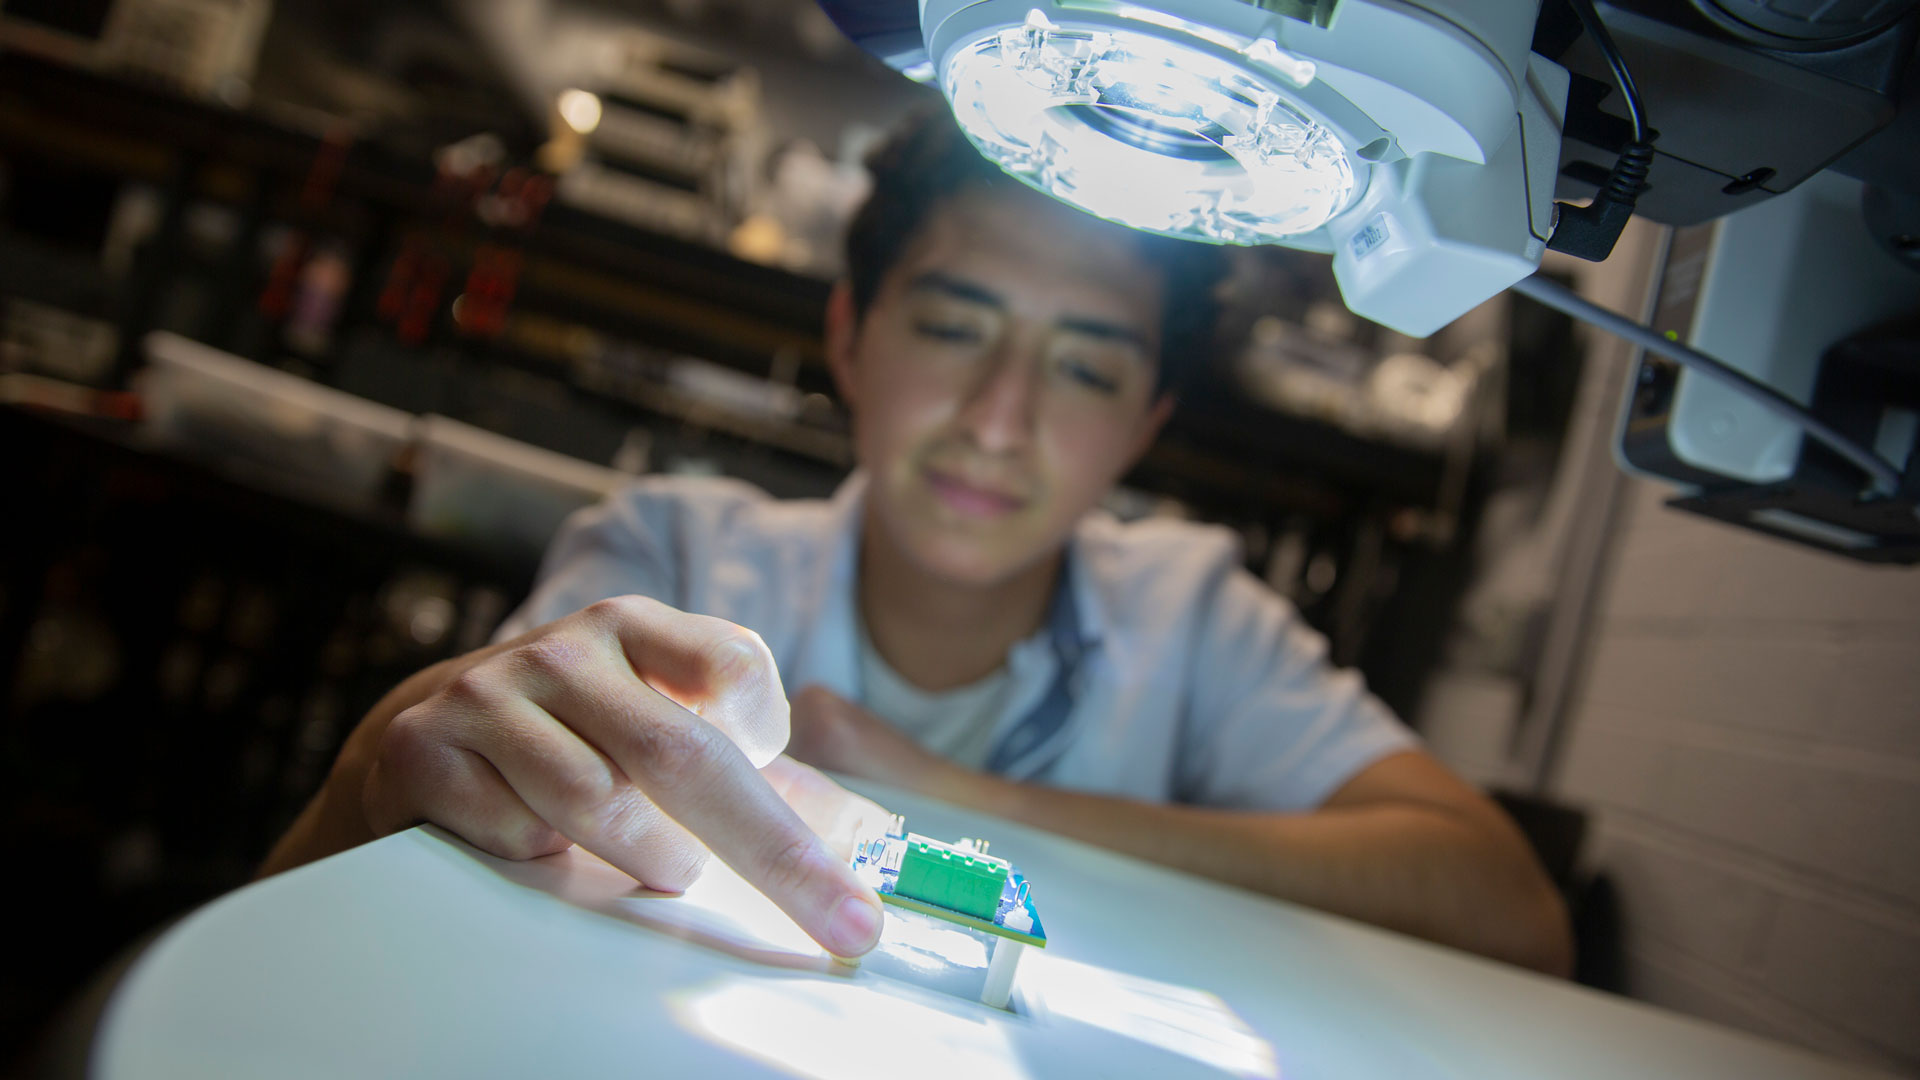 ASU electrical engineering student Humberto Delgado conducts research as part of the FURI program.